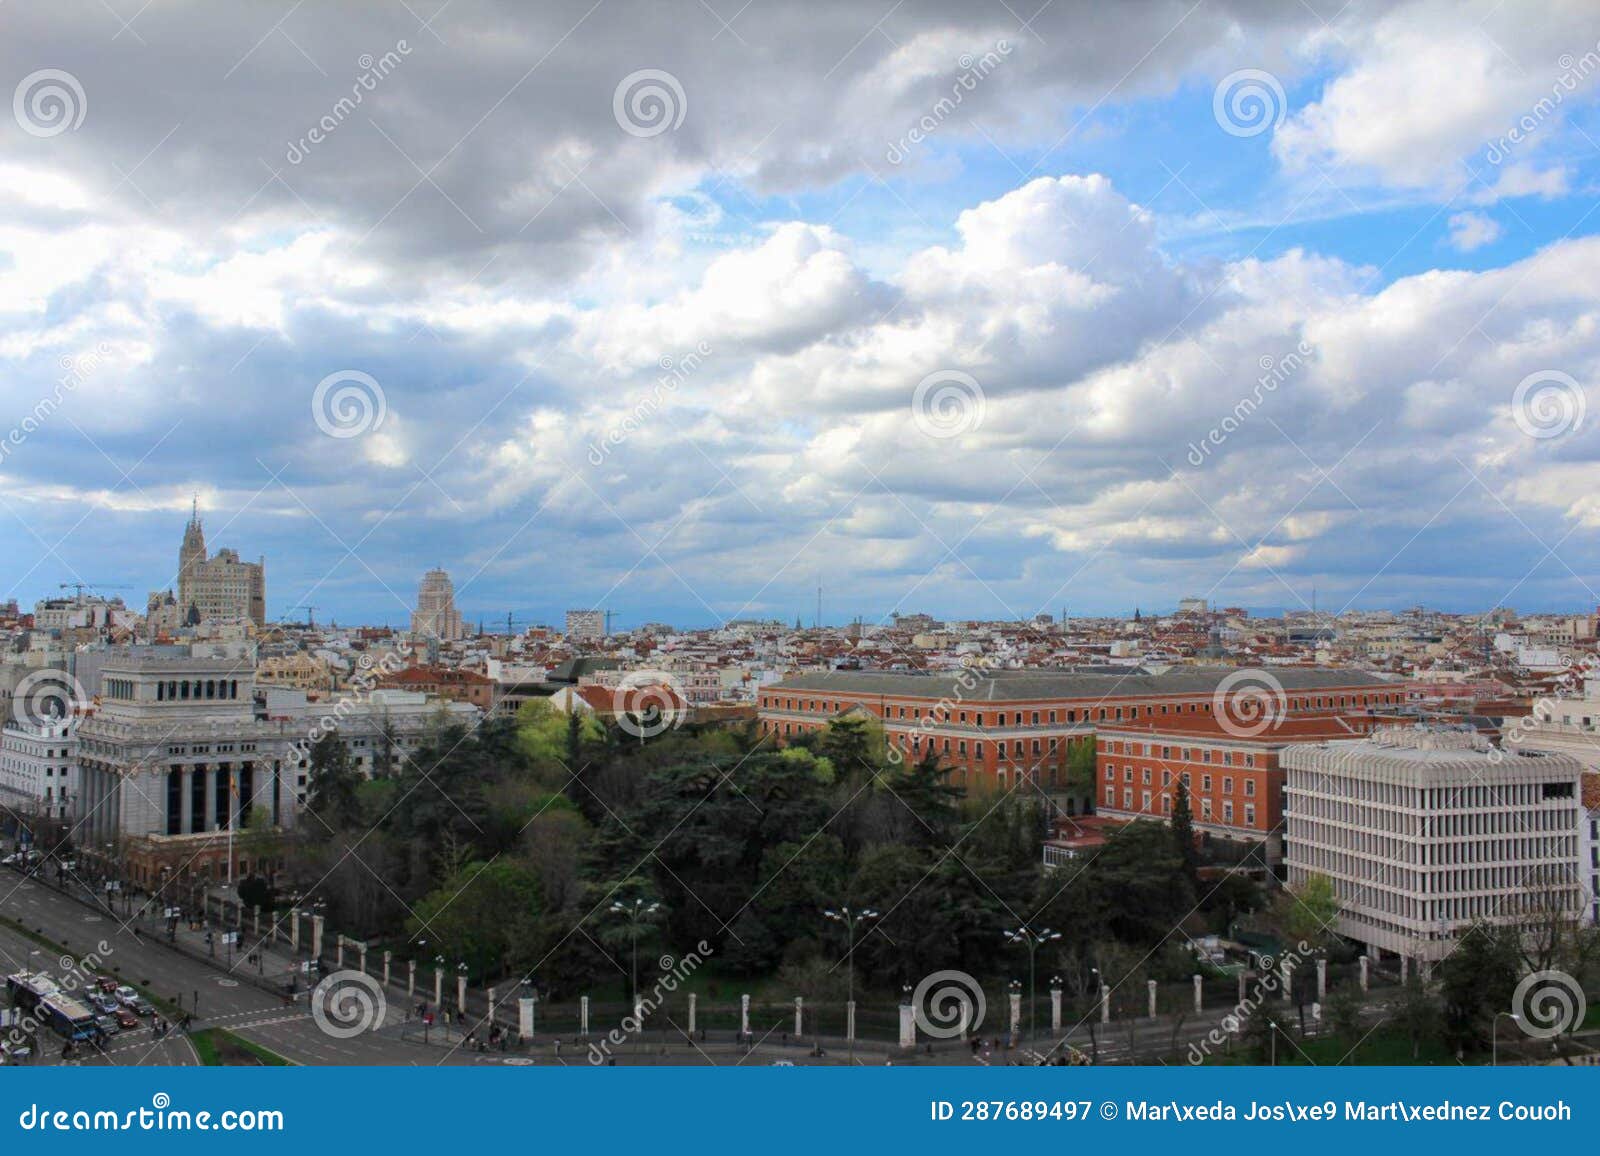 madrid from the heights